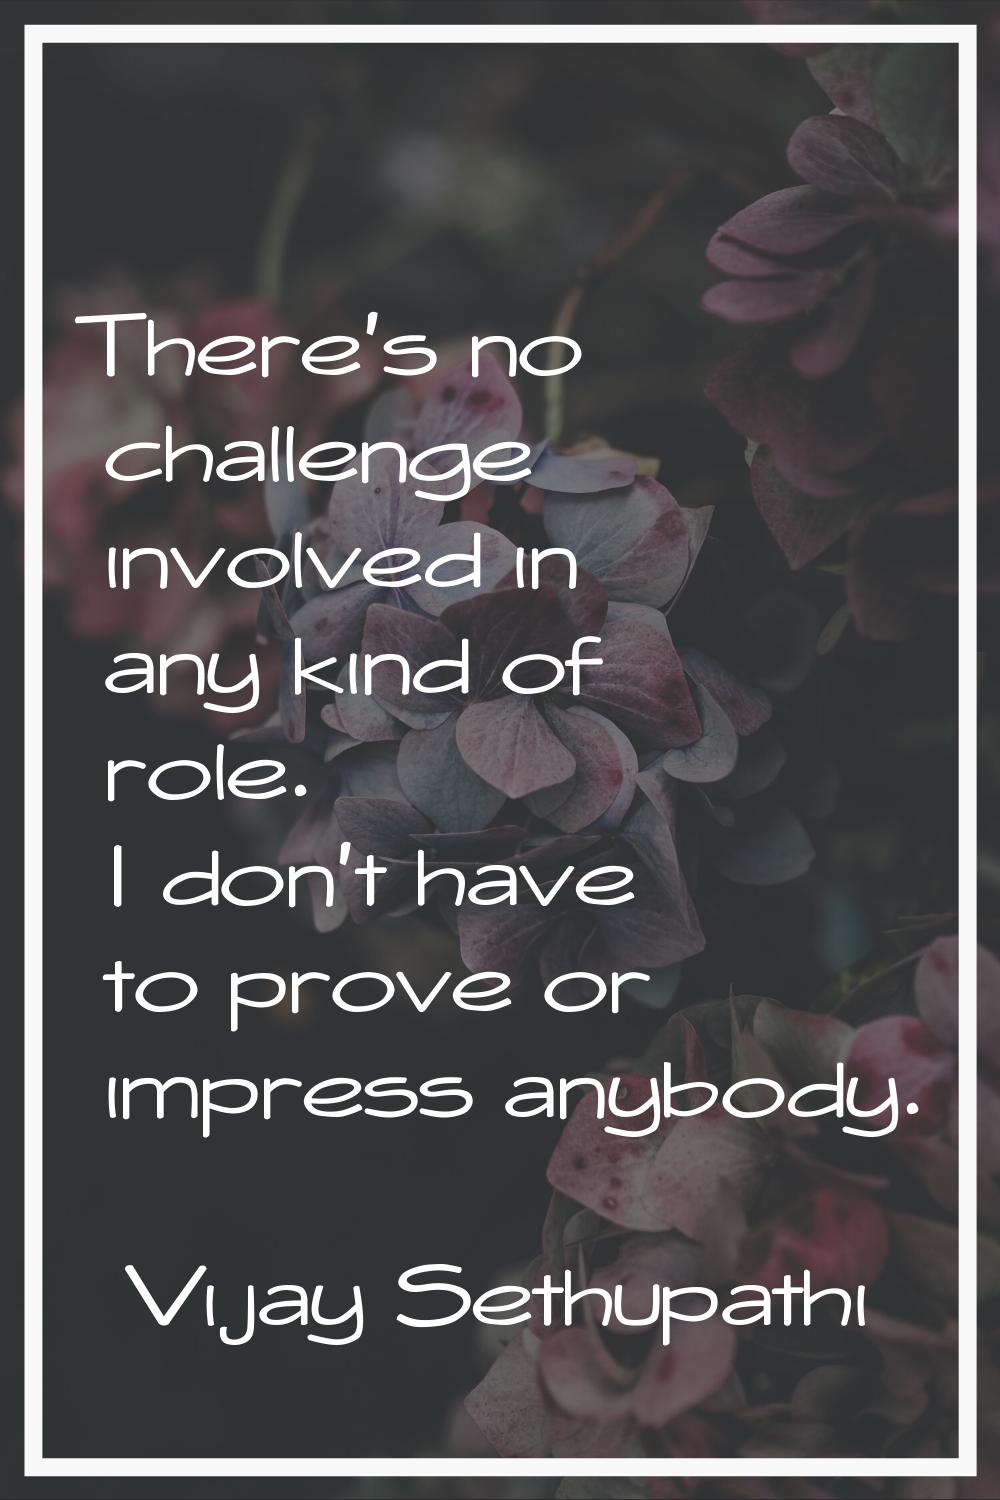 There's no challenge involved in any kind of role. I don't have to prove or impress anybody.